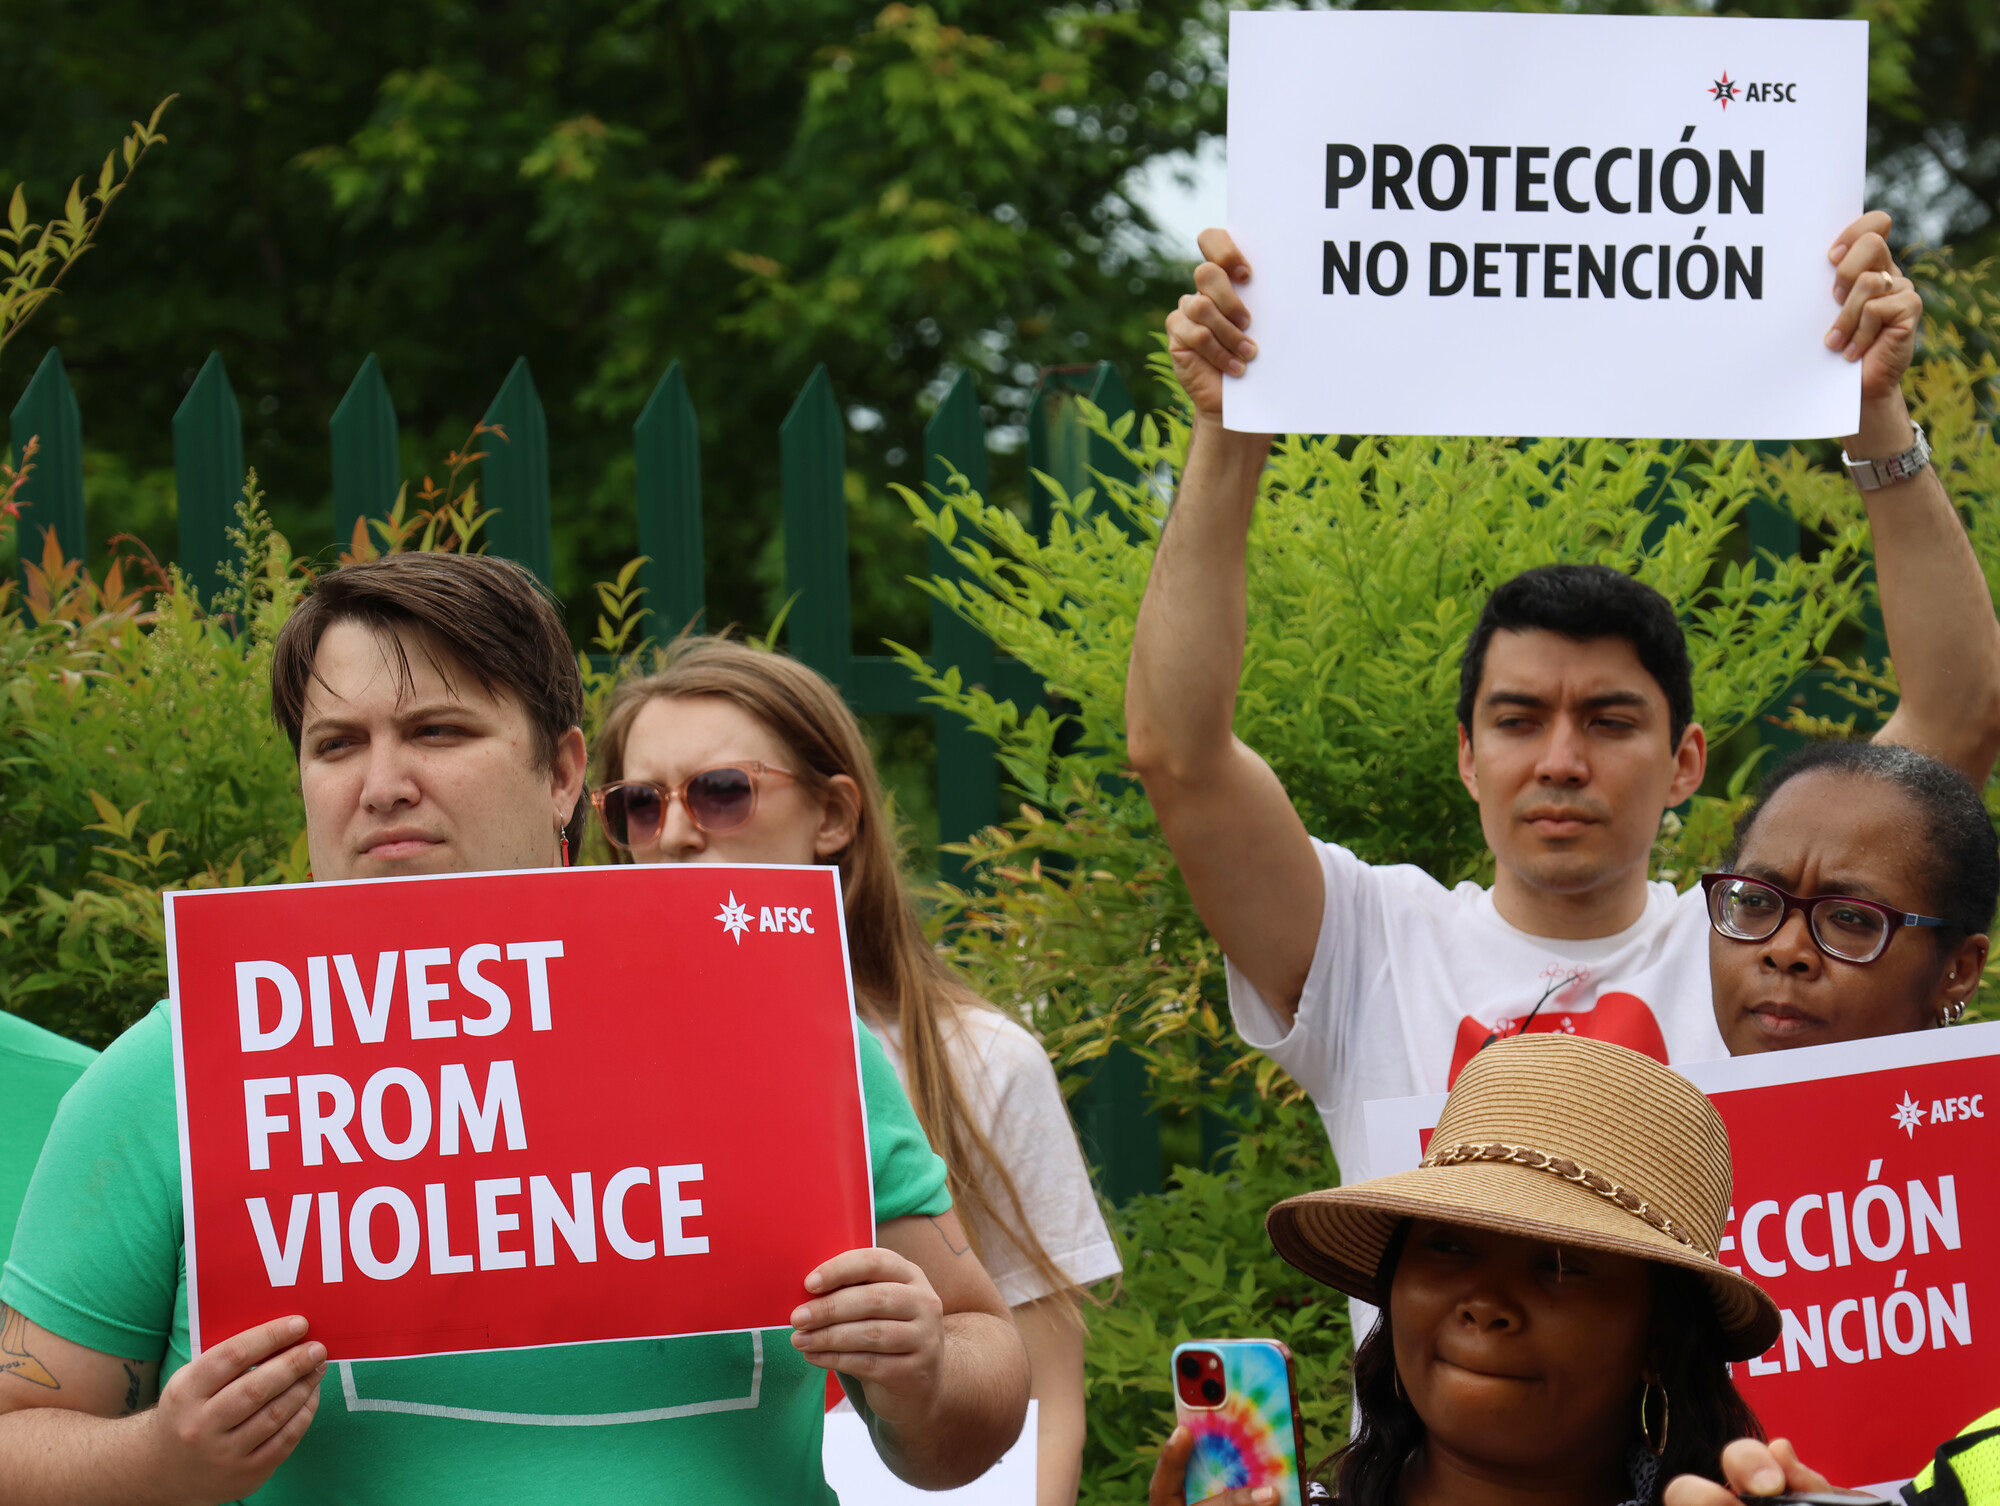 Protesters holding signs that say 'Divest from violence' and 'Proteccion no detencion'